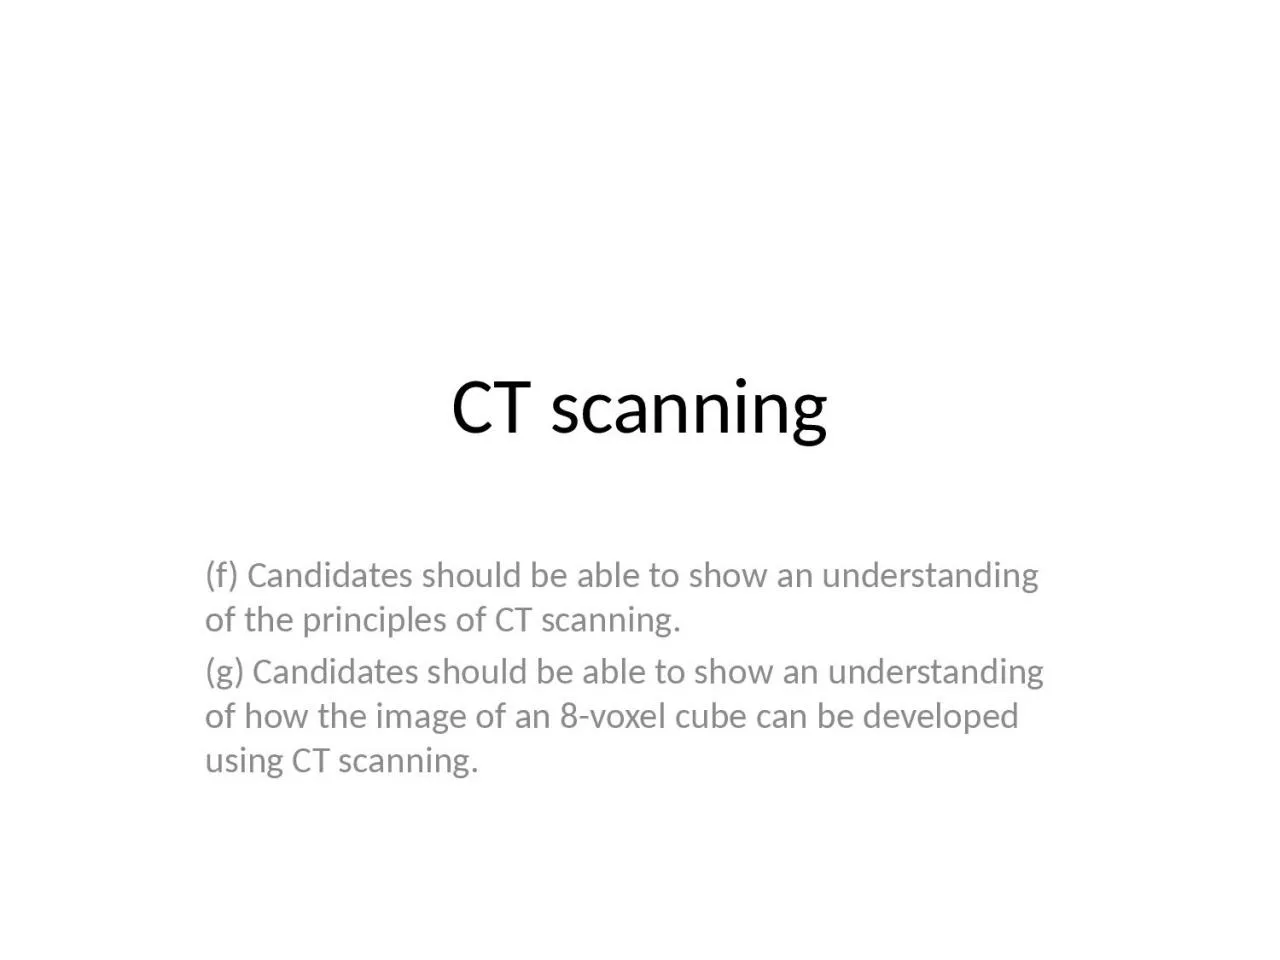 CT scanning (f) Candidates should be able to show an understanding of the principles of